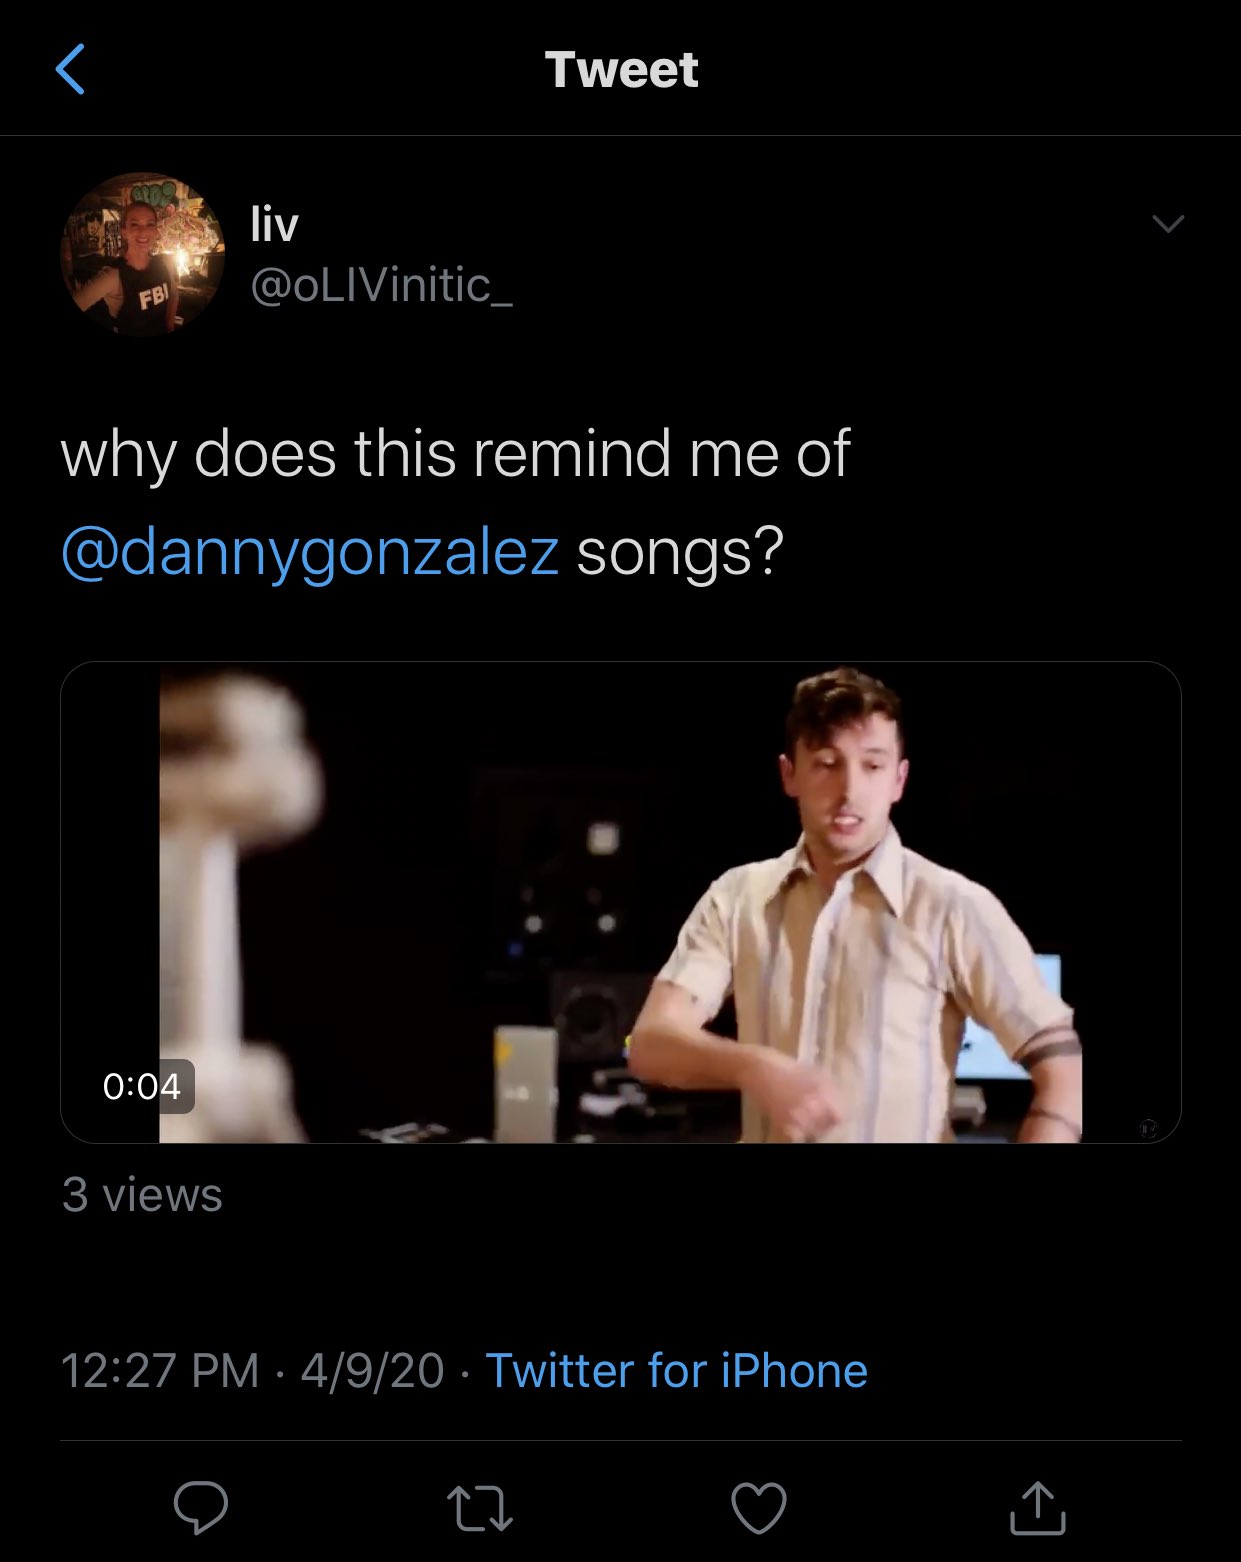 This has a whole new meaning now : r/DannyGonzalez